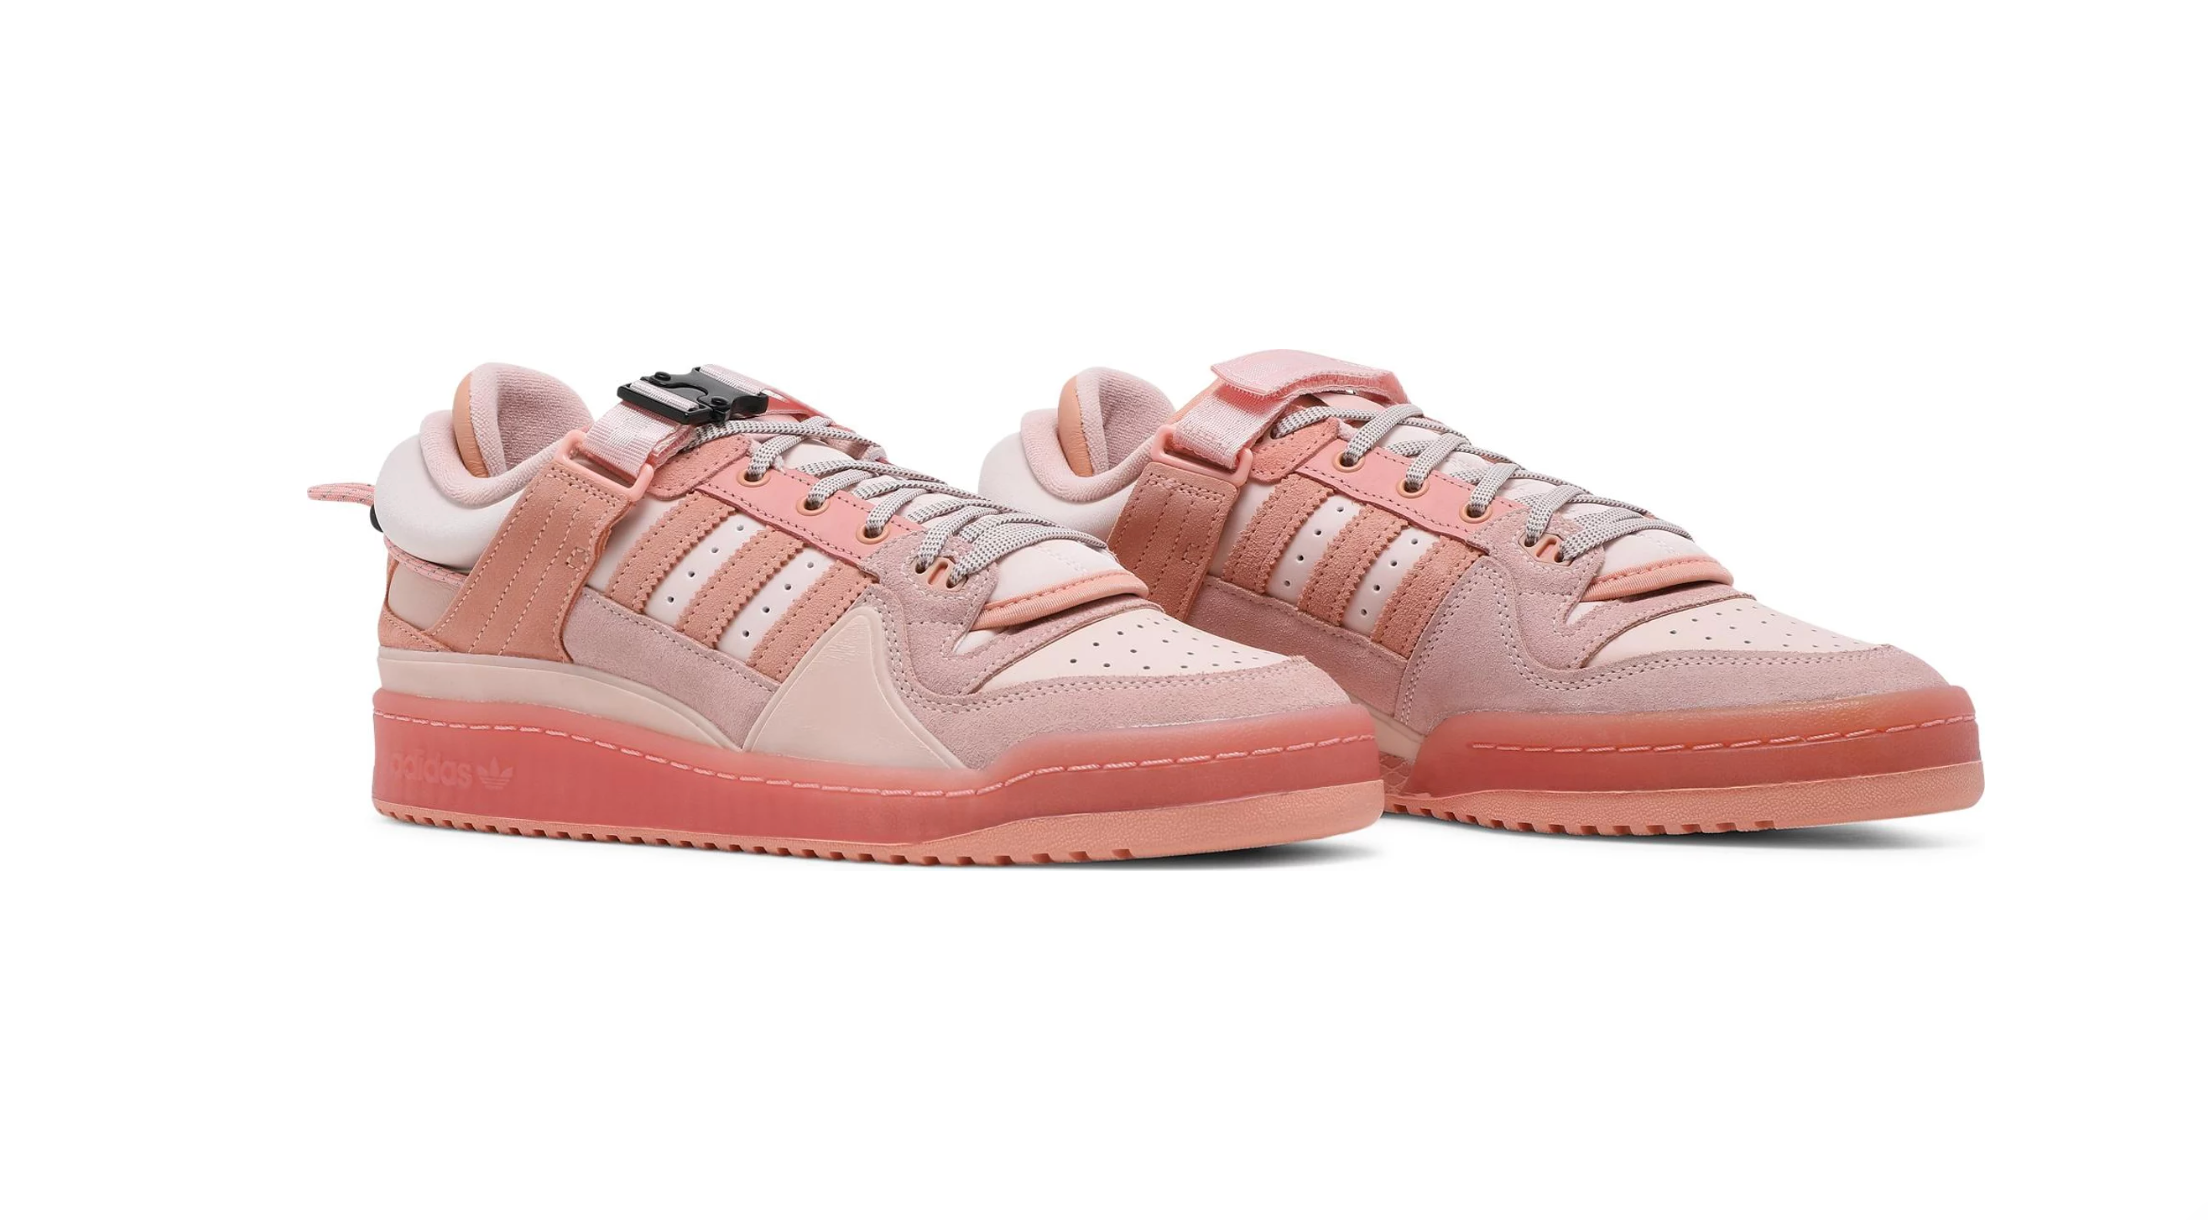 ADIDAS FORUM LOW BAD BUNNY PINK EASTER EGG